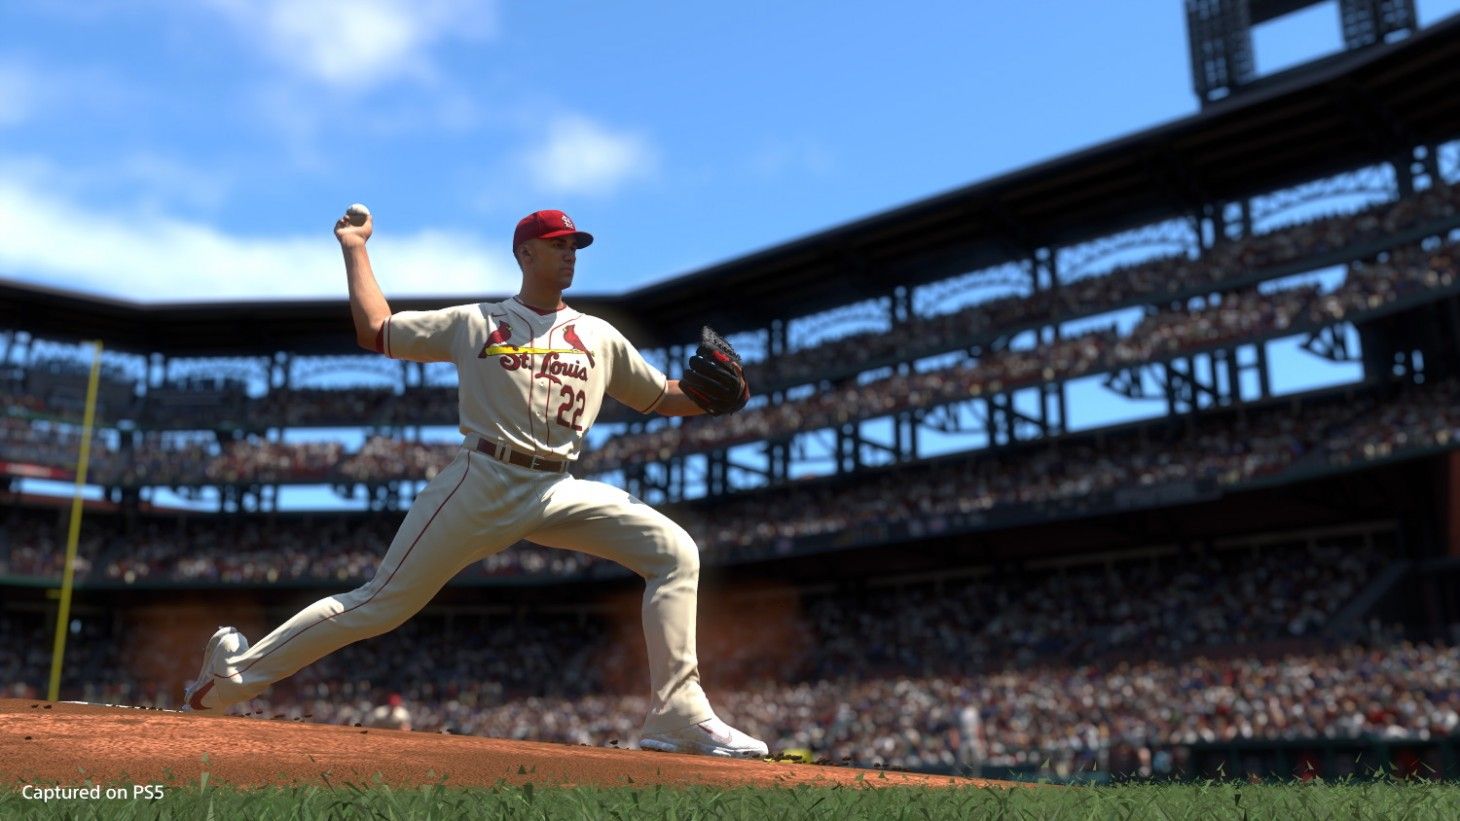 MLB The Show 22 Update 1.11 Patch Notes arrive with Padres City